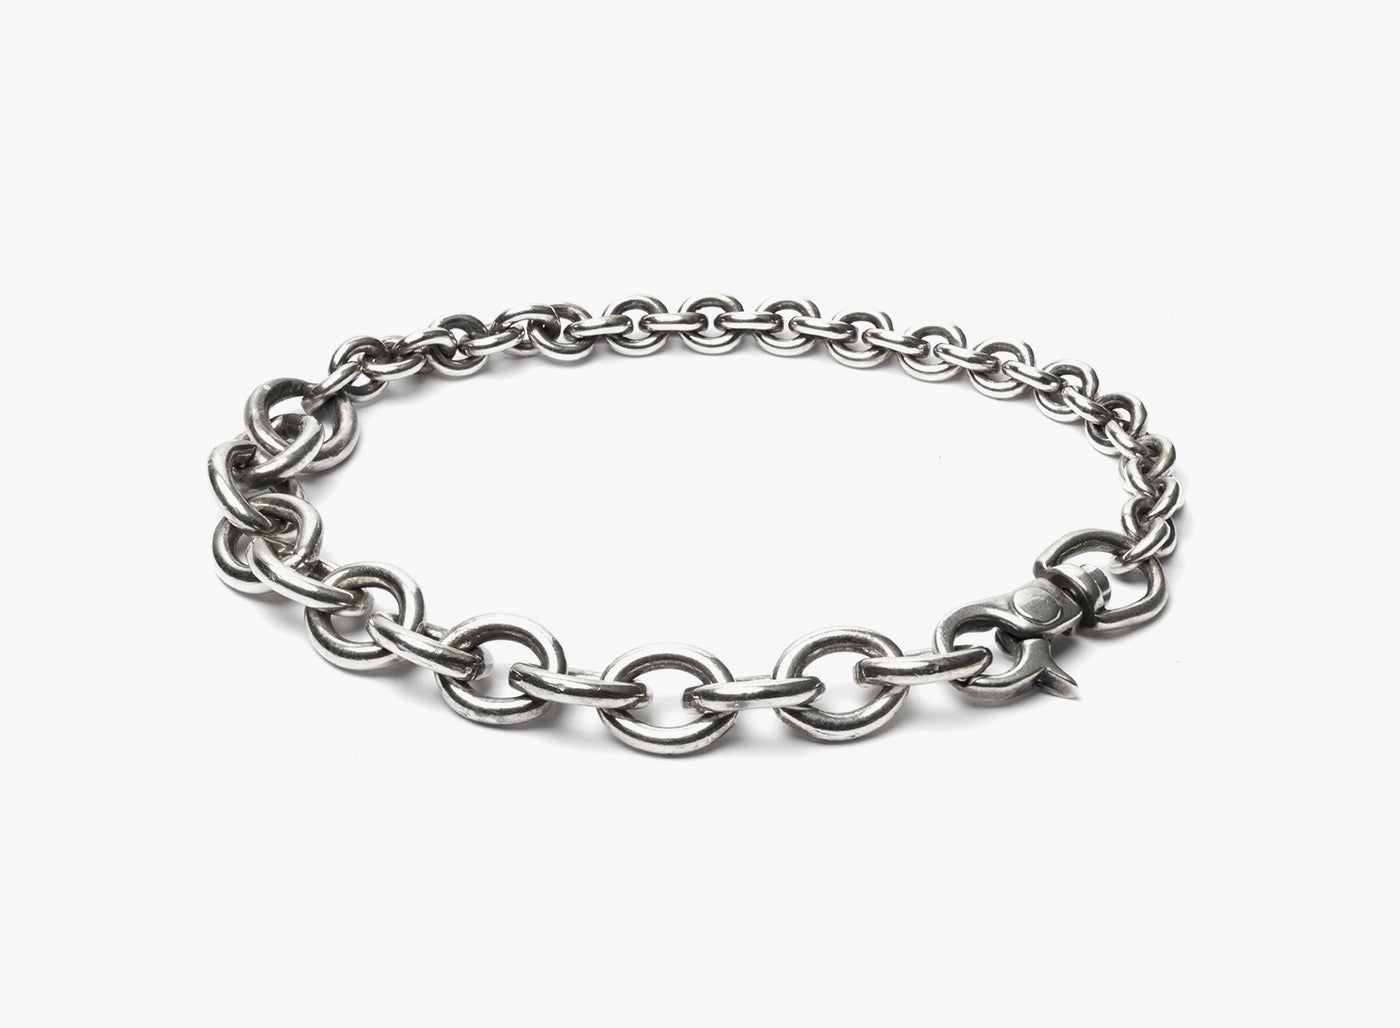 MIXED CHAIN BRACELET 114: this adjustable bracelet consists of varied sterling cable chains.